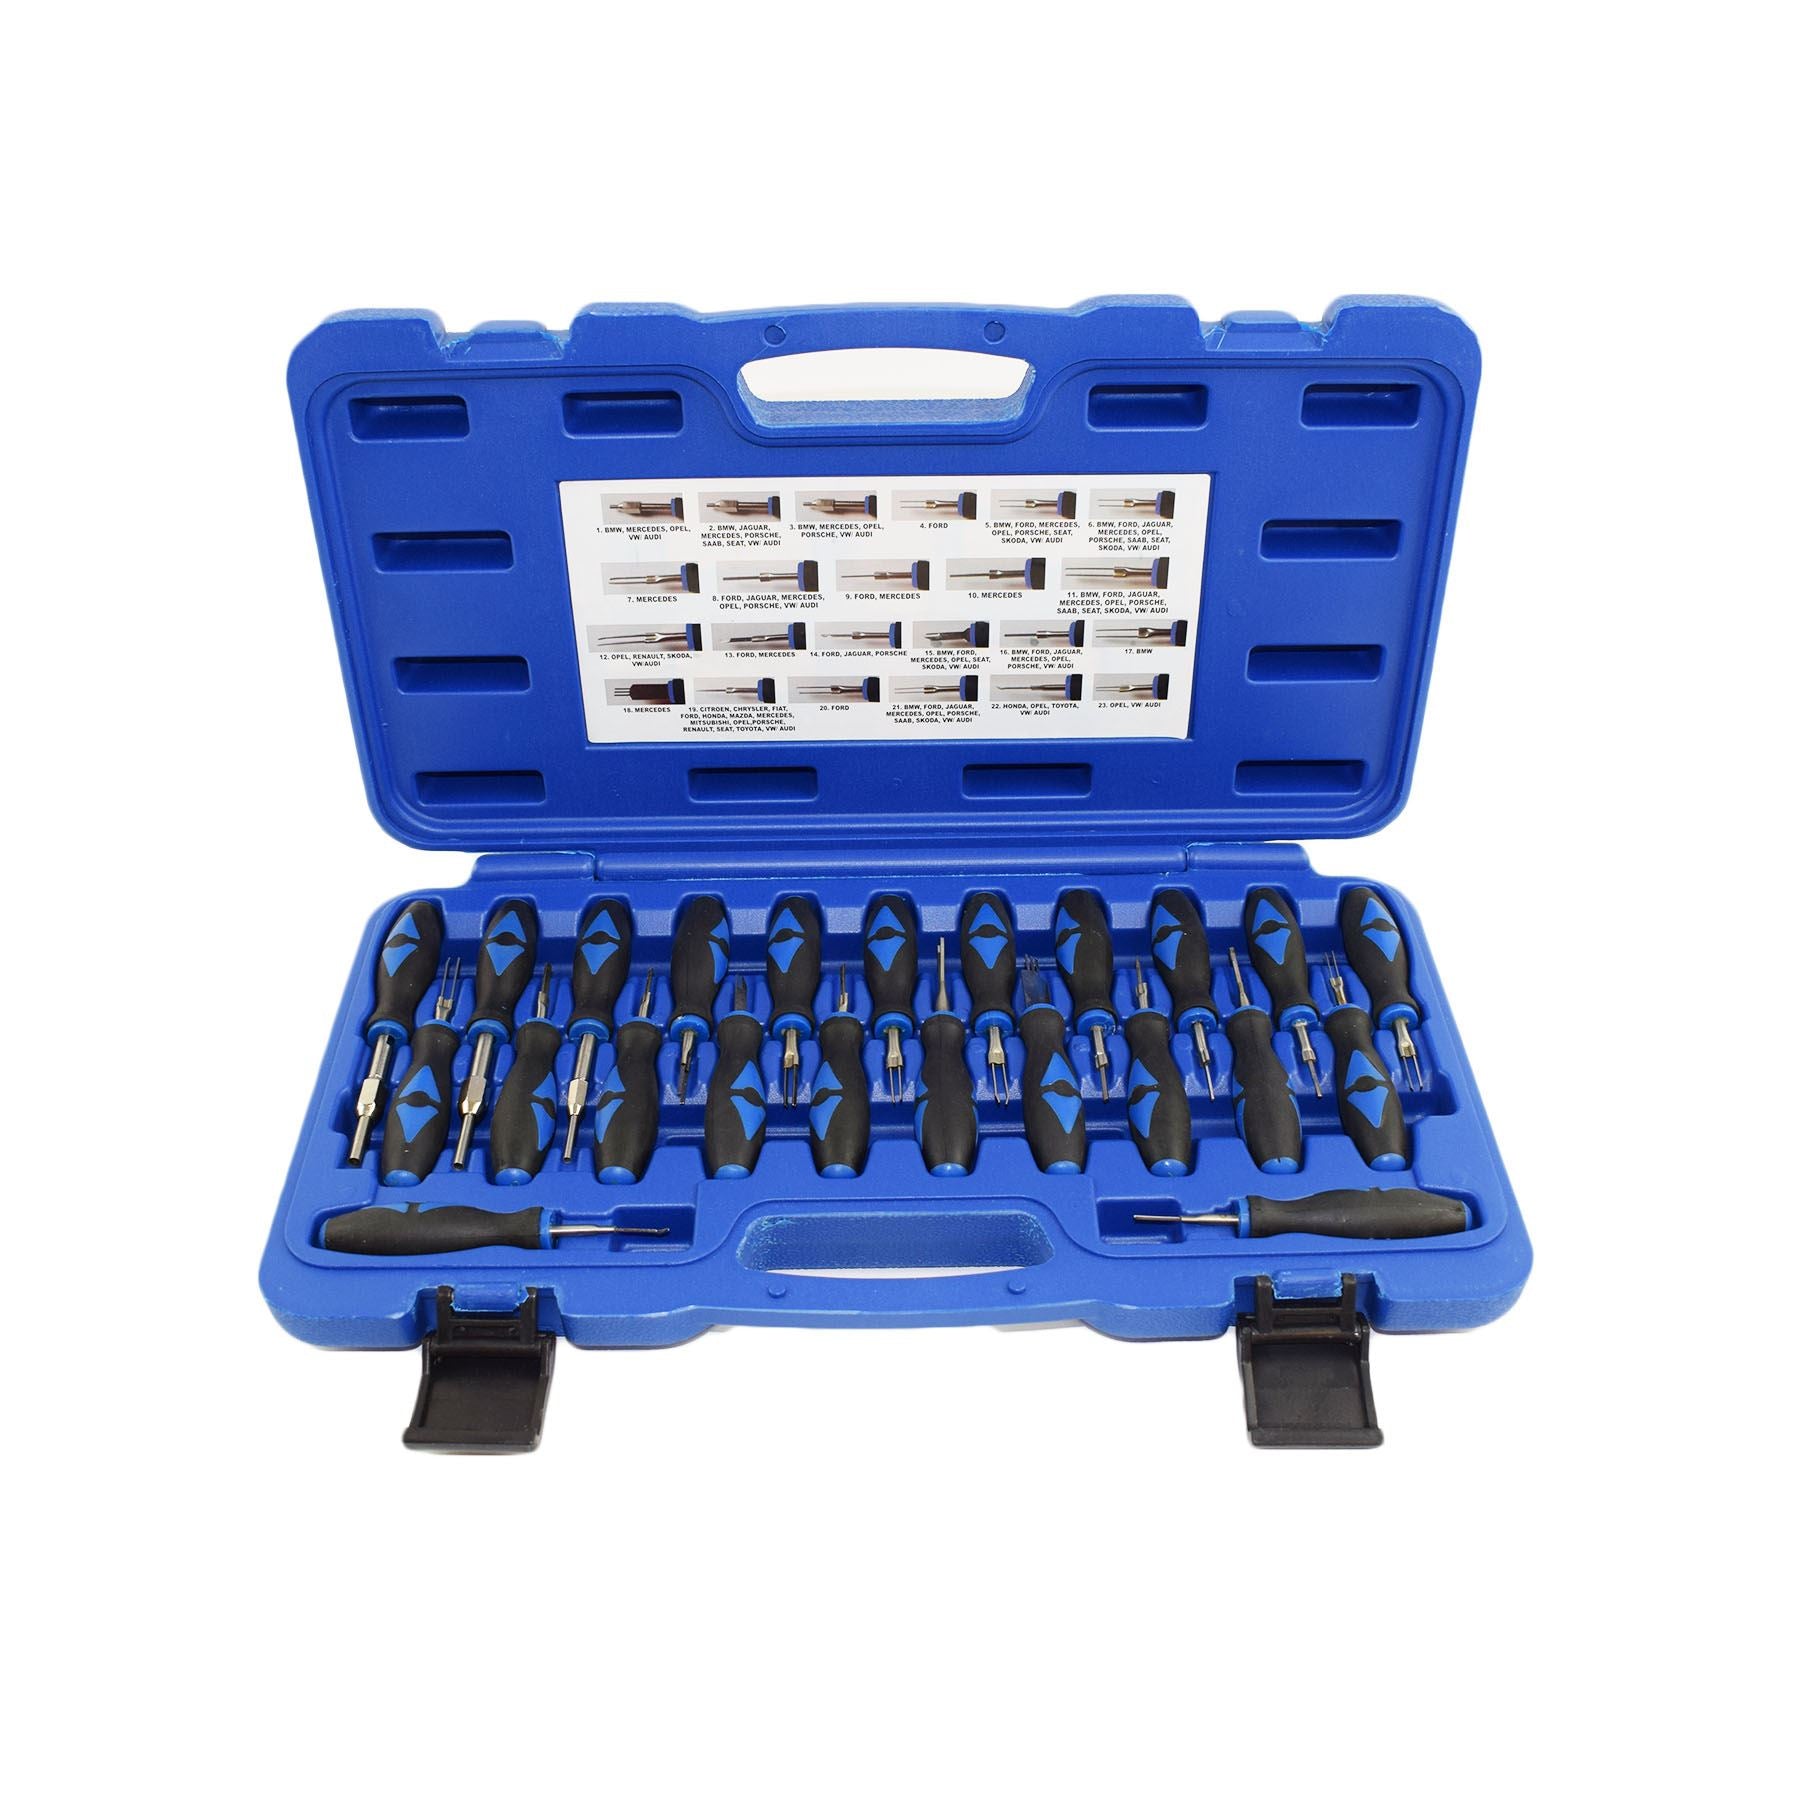 Master Universal Terminal Release Removal Remover Tool Set 23pc Bergen